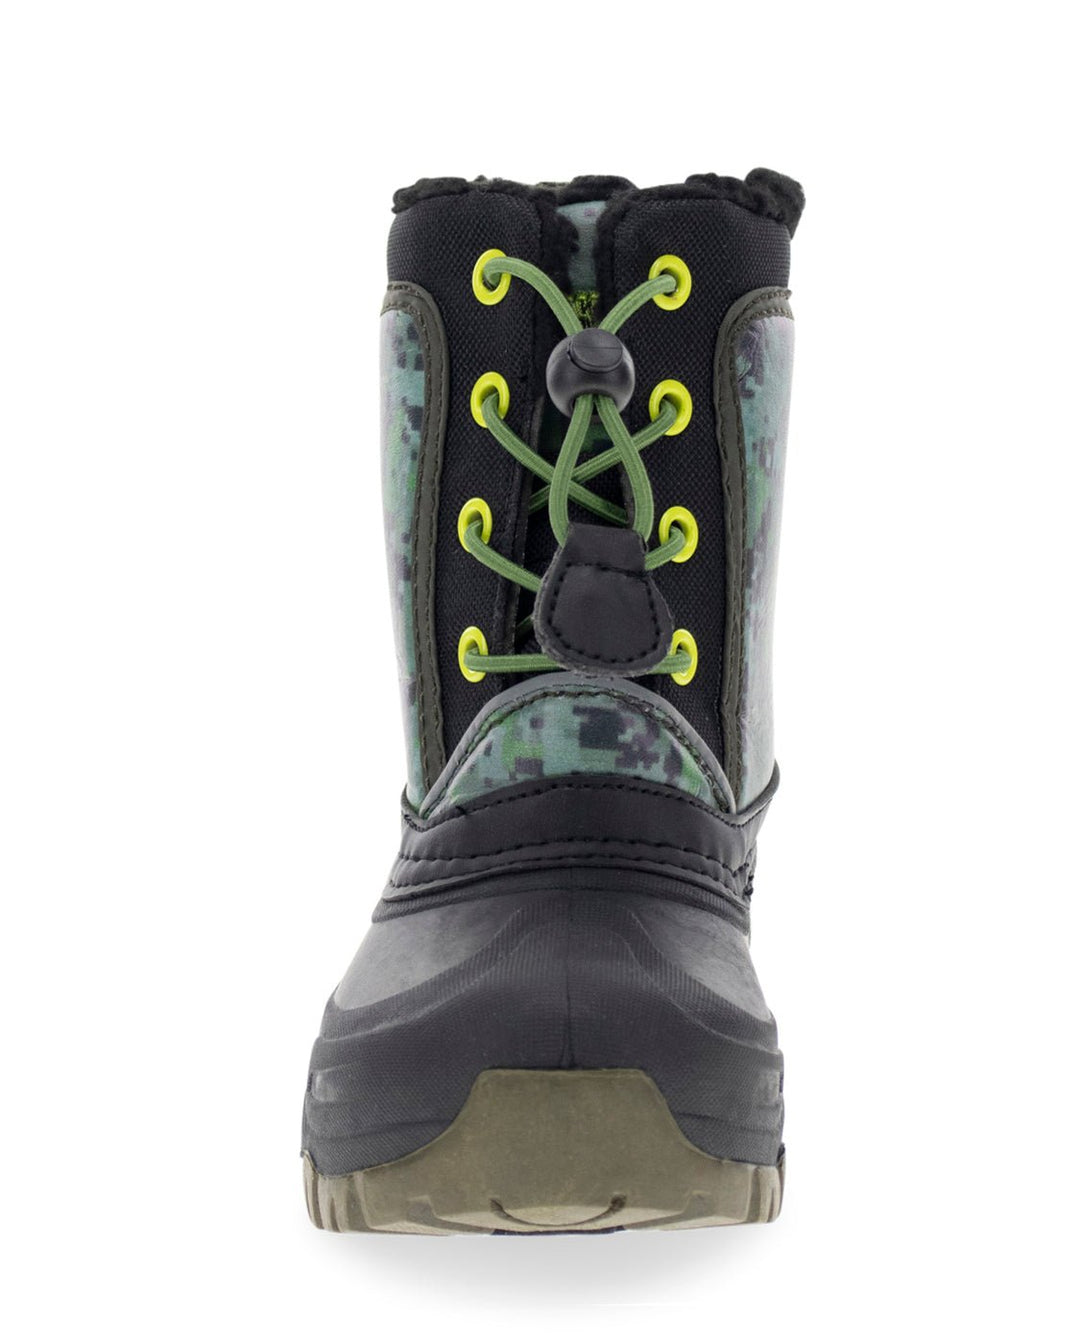 Kids Olympic Cold Weather Boot - Olive - Western Chief